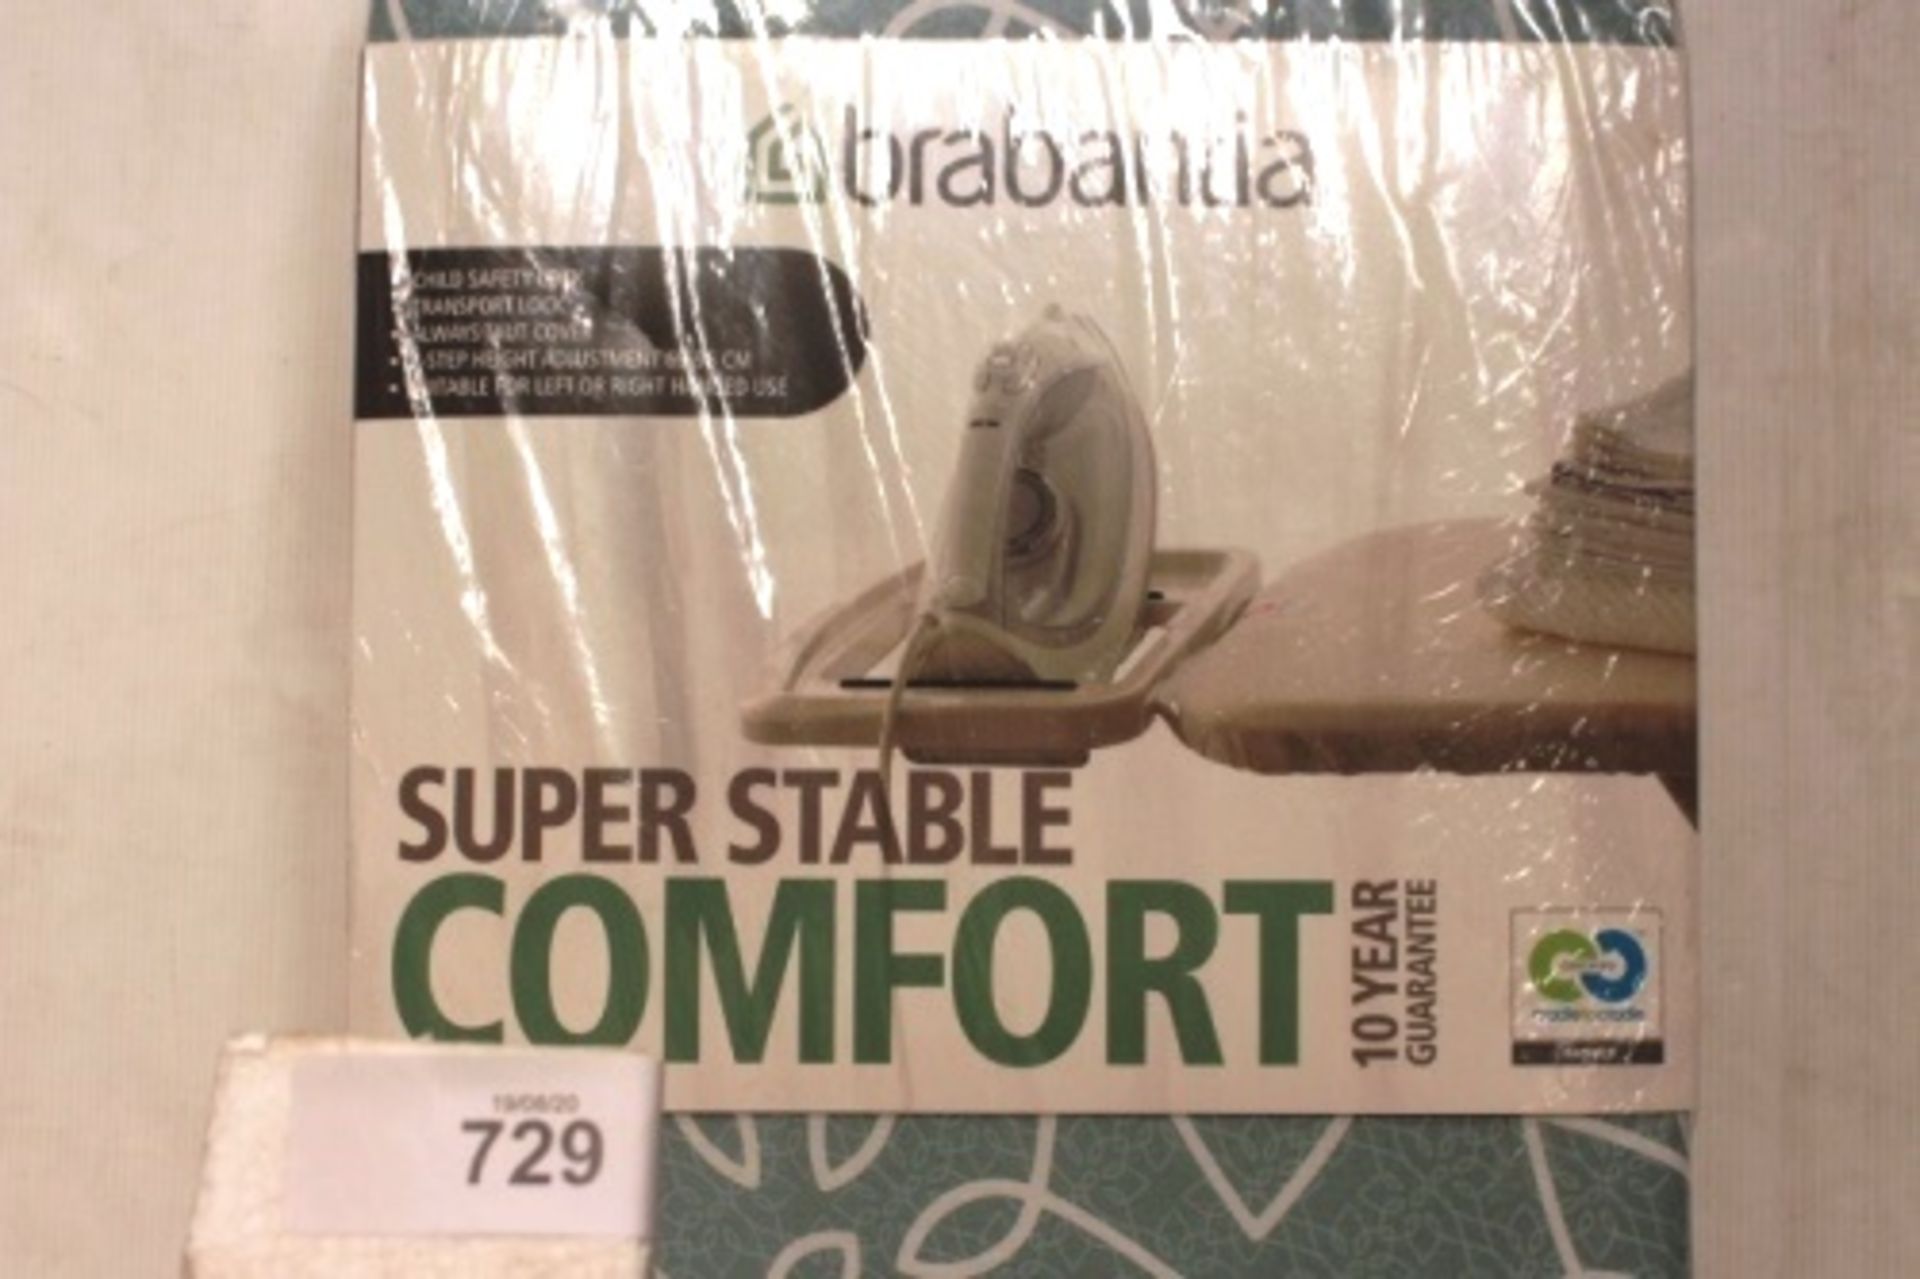 1 x Brabantia super stable comfort Mandala ironing board, Art No. 124723 - New in pack (GS11) - Image 2 of 2